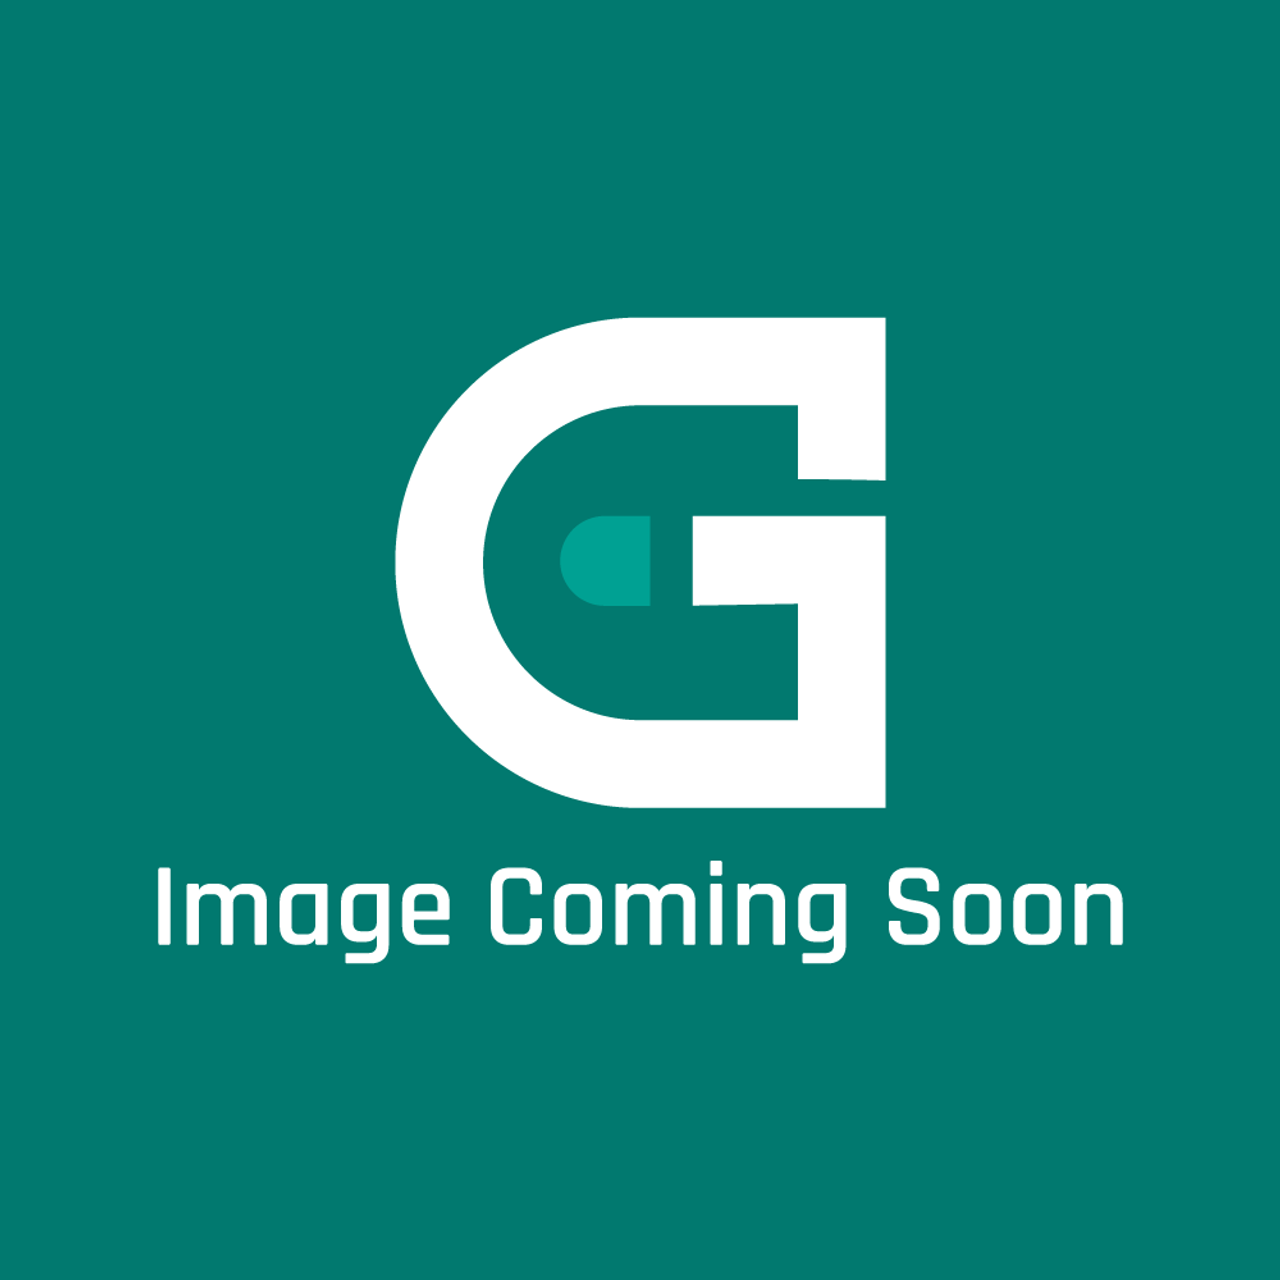 Blodgett 51693 - Contactor, Cgms-6A-230-0 1 - Image Coming Soon!